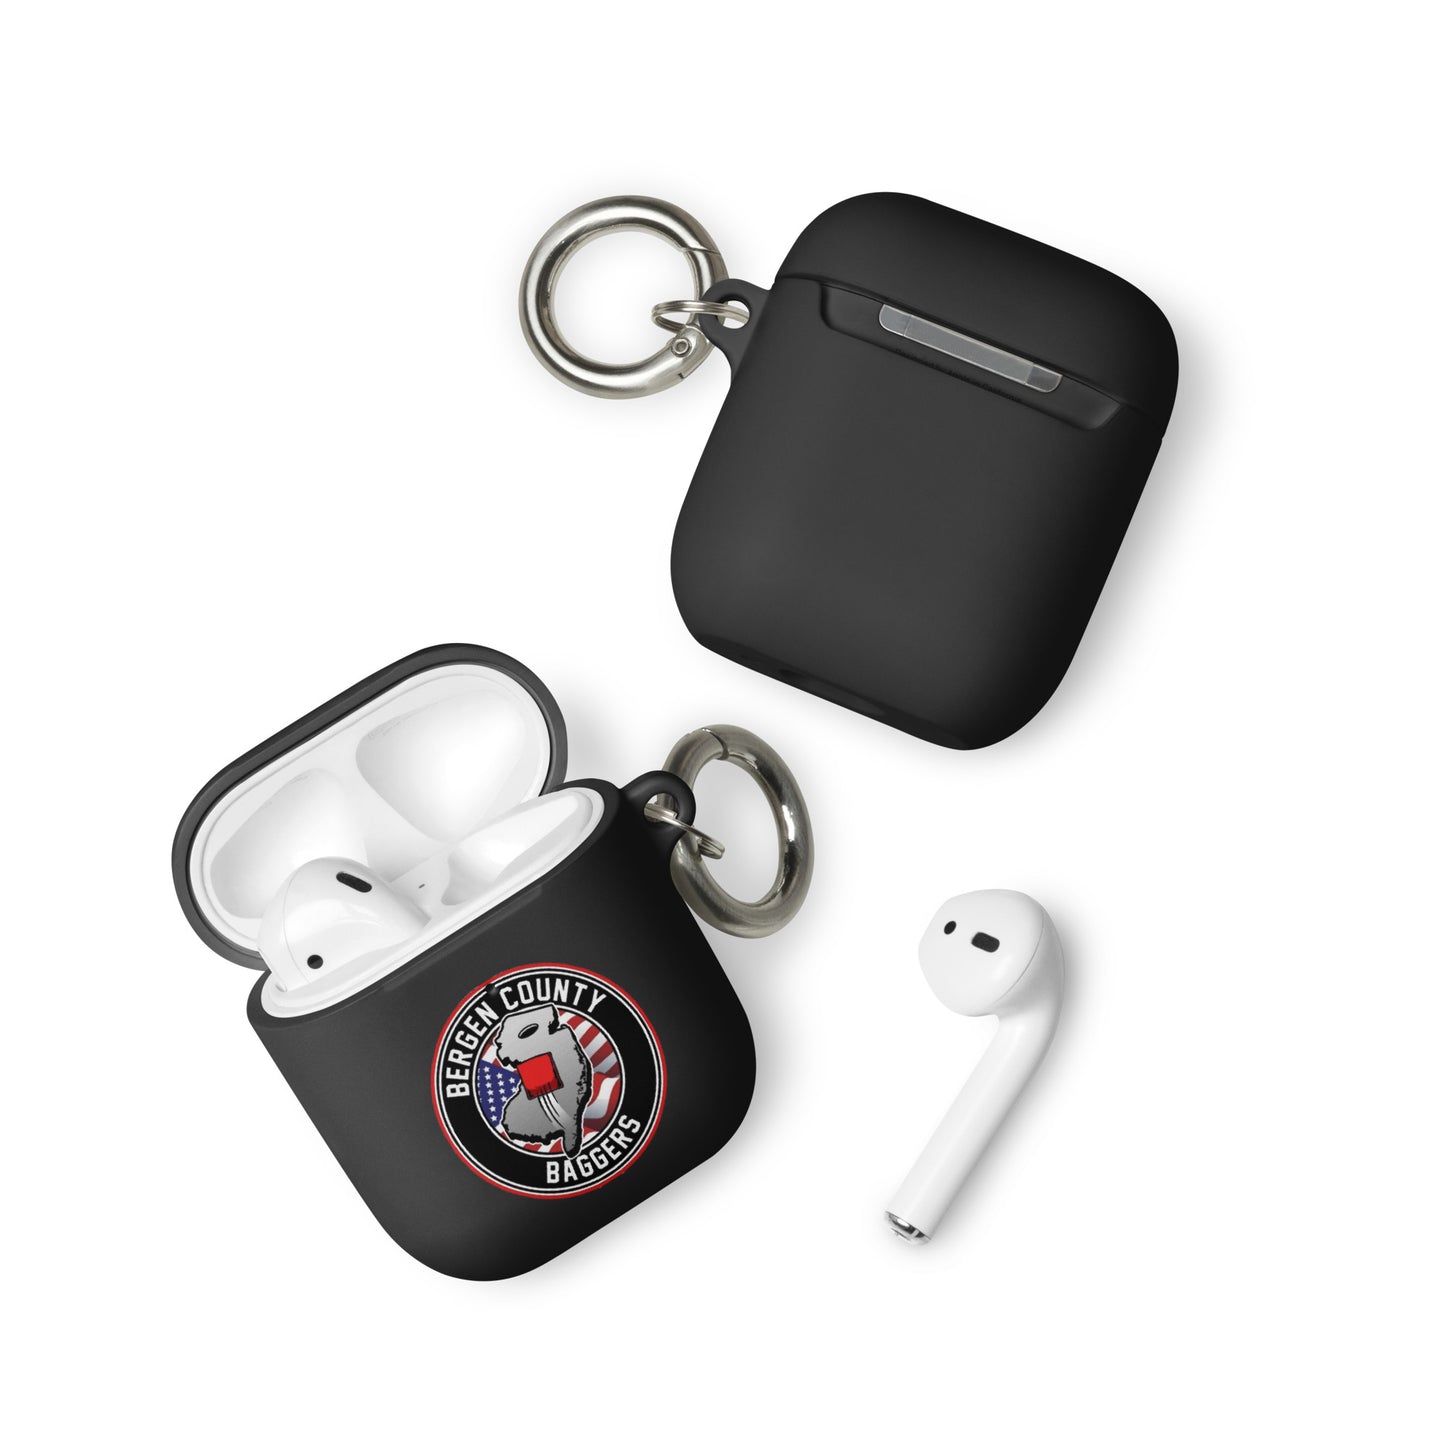 Bergen County Baggers AirPods case